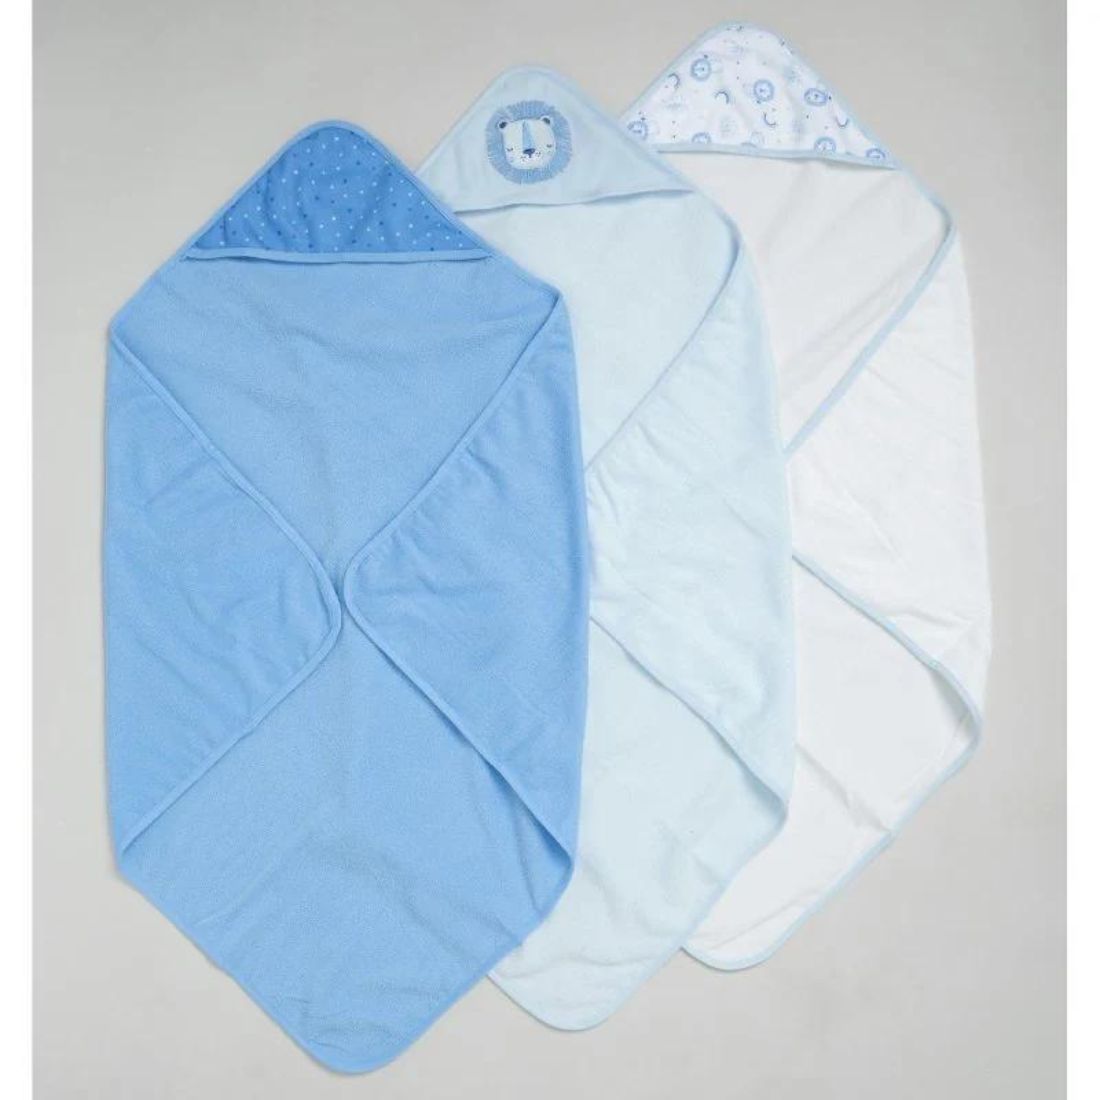 Blue towel and wash cloths